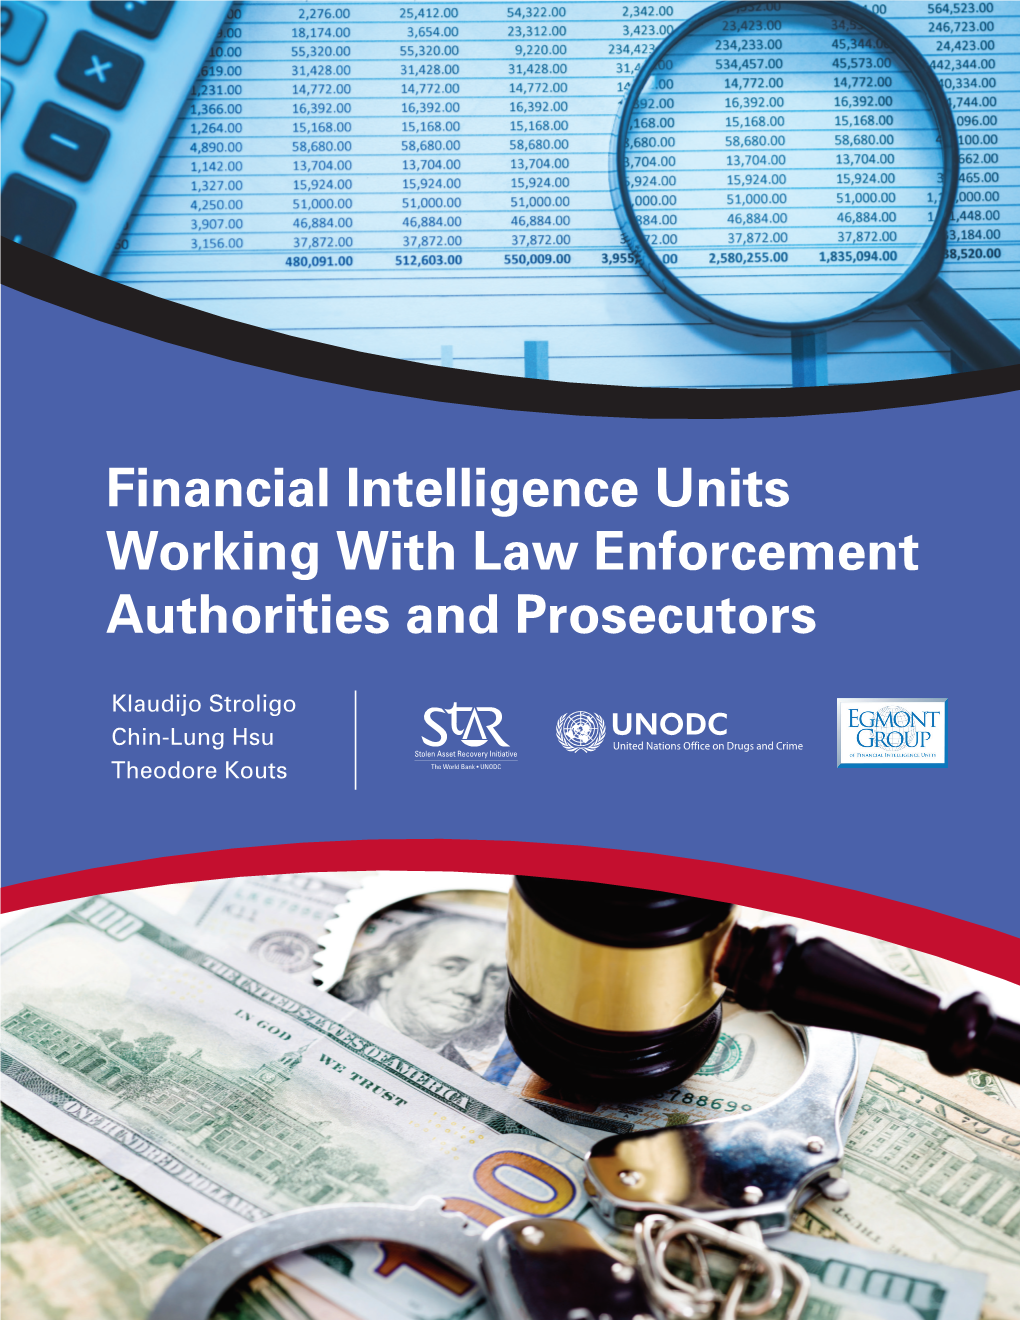 Financial Intelligence Units Working with Law Enforcement Authorities and Prosecutors